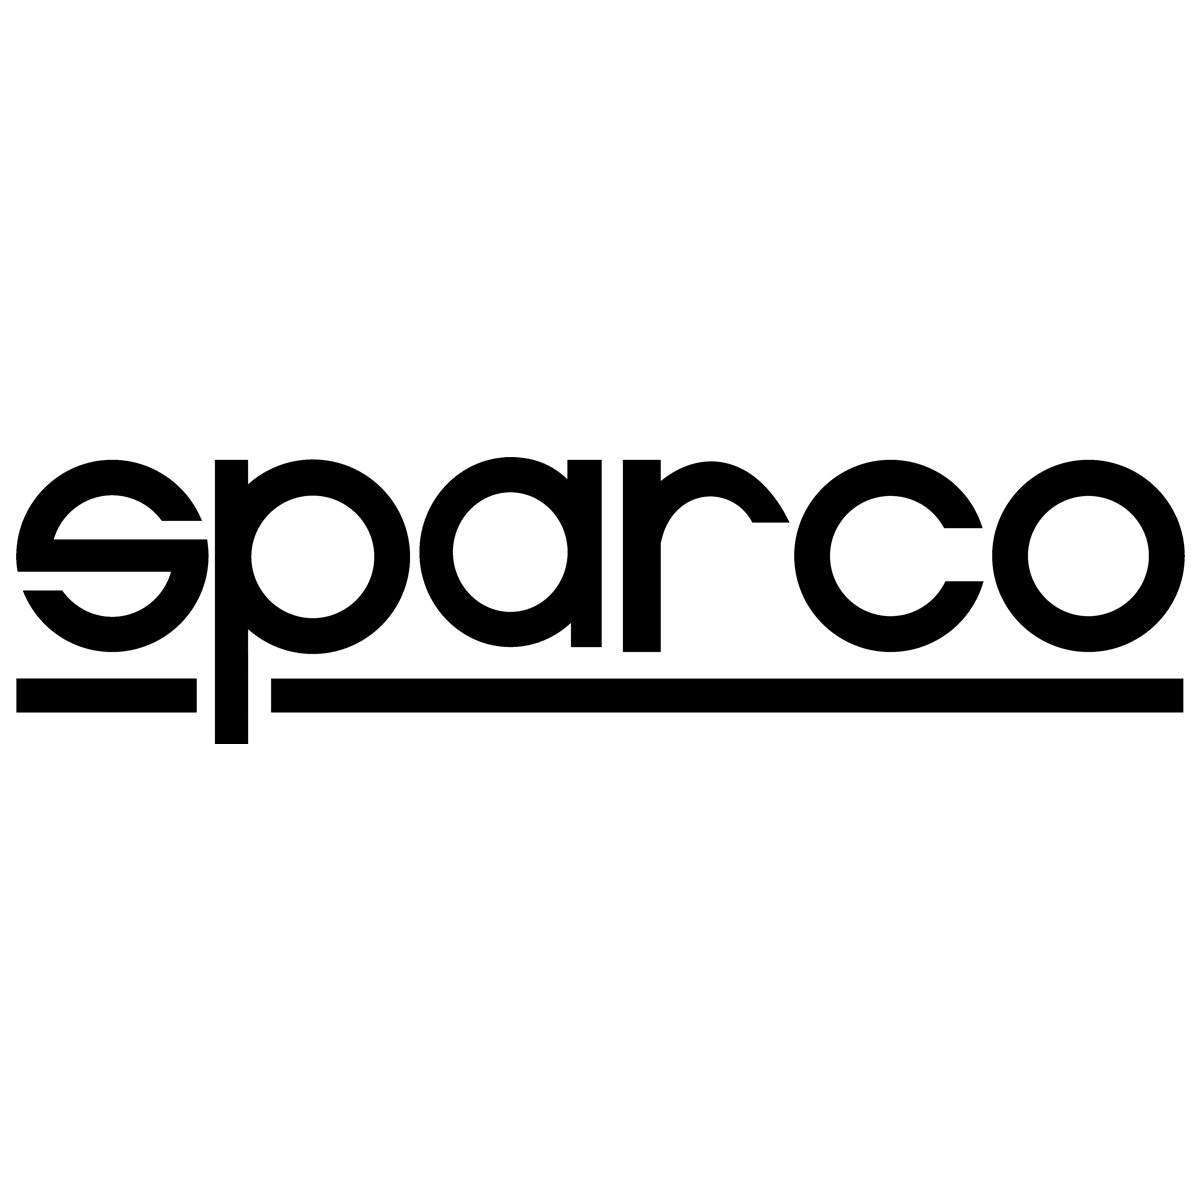 Sparco Racing